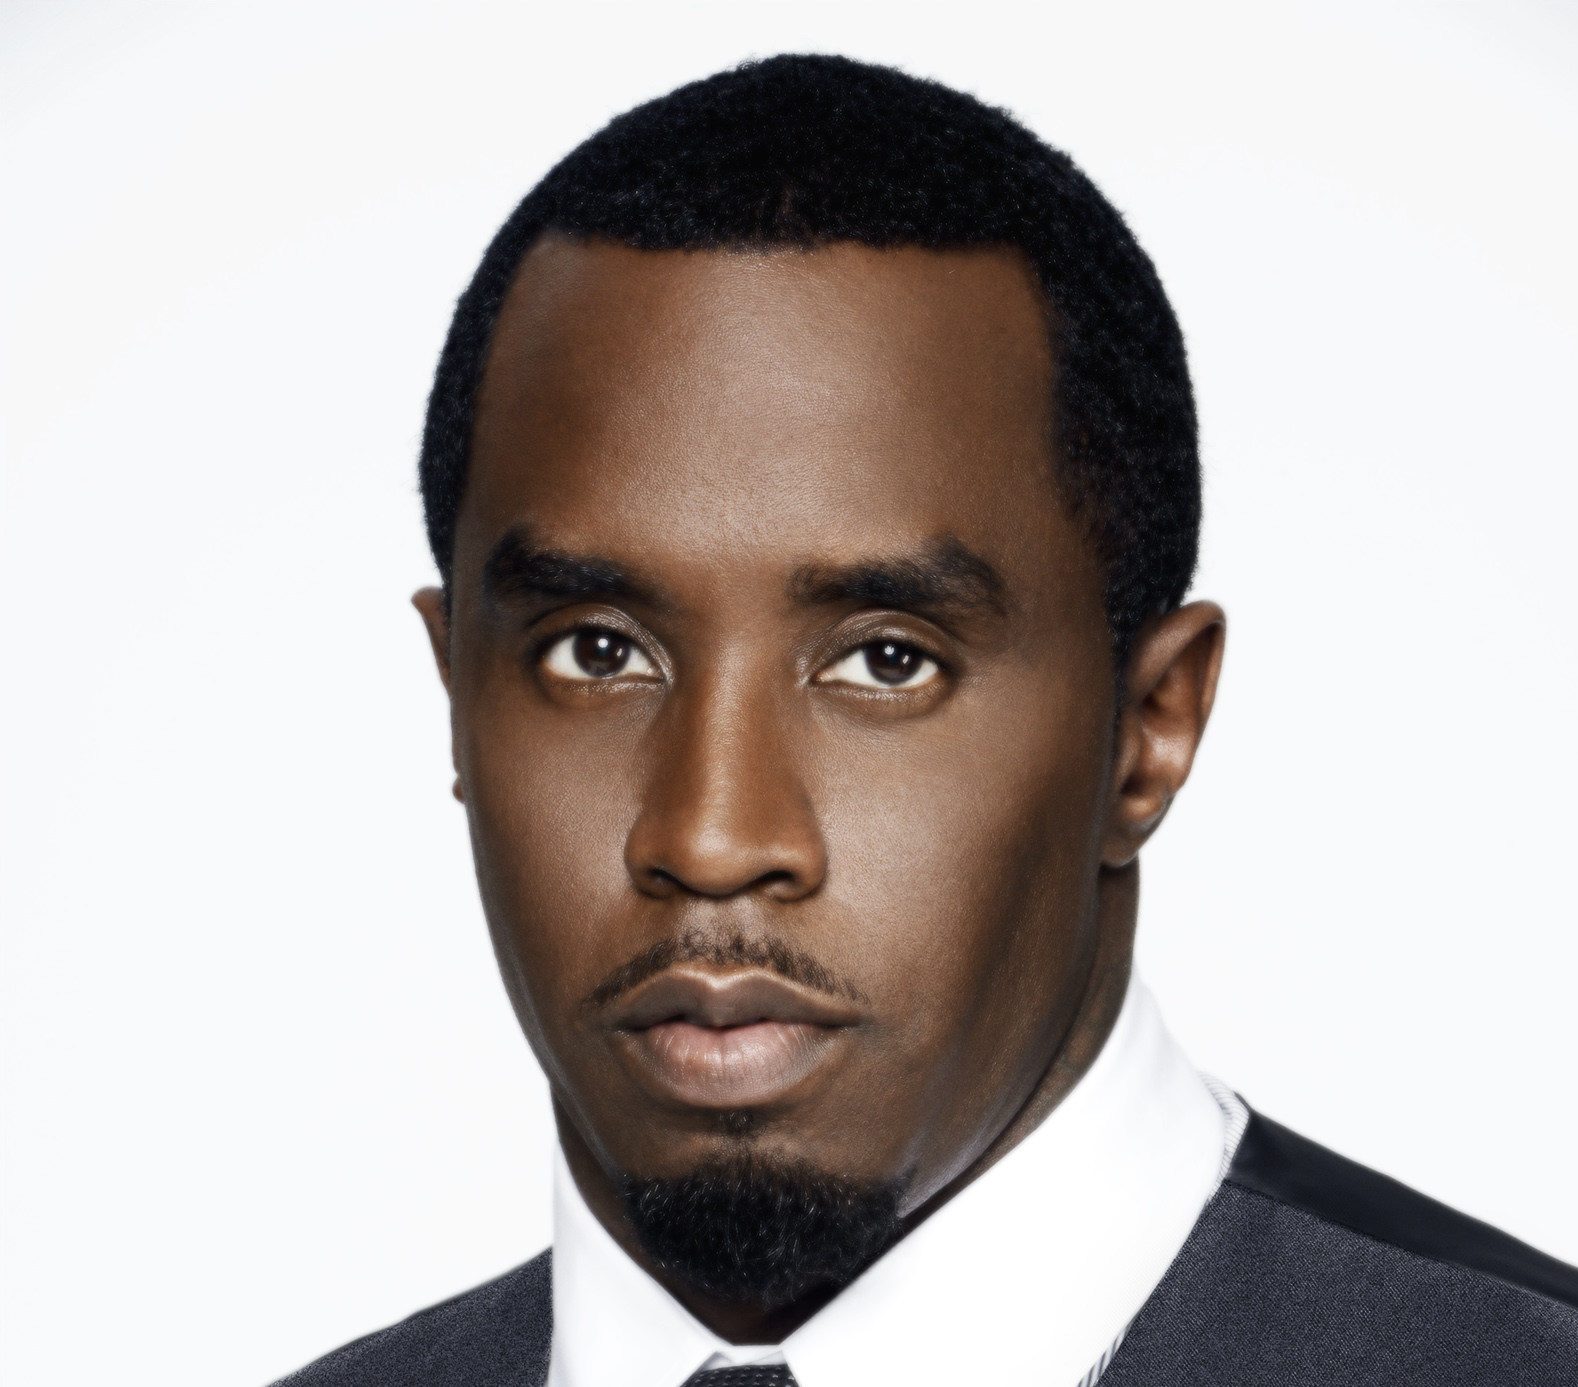 Sean Diddy Combs Claims Sexual Assault Lawsuit Against Him Is “Unconstitutional” In Court Response